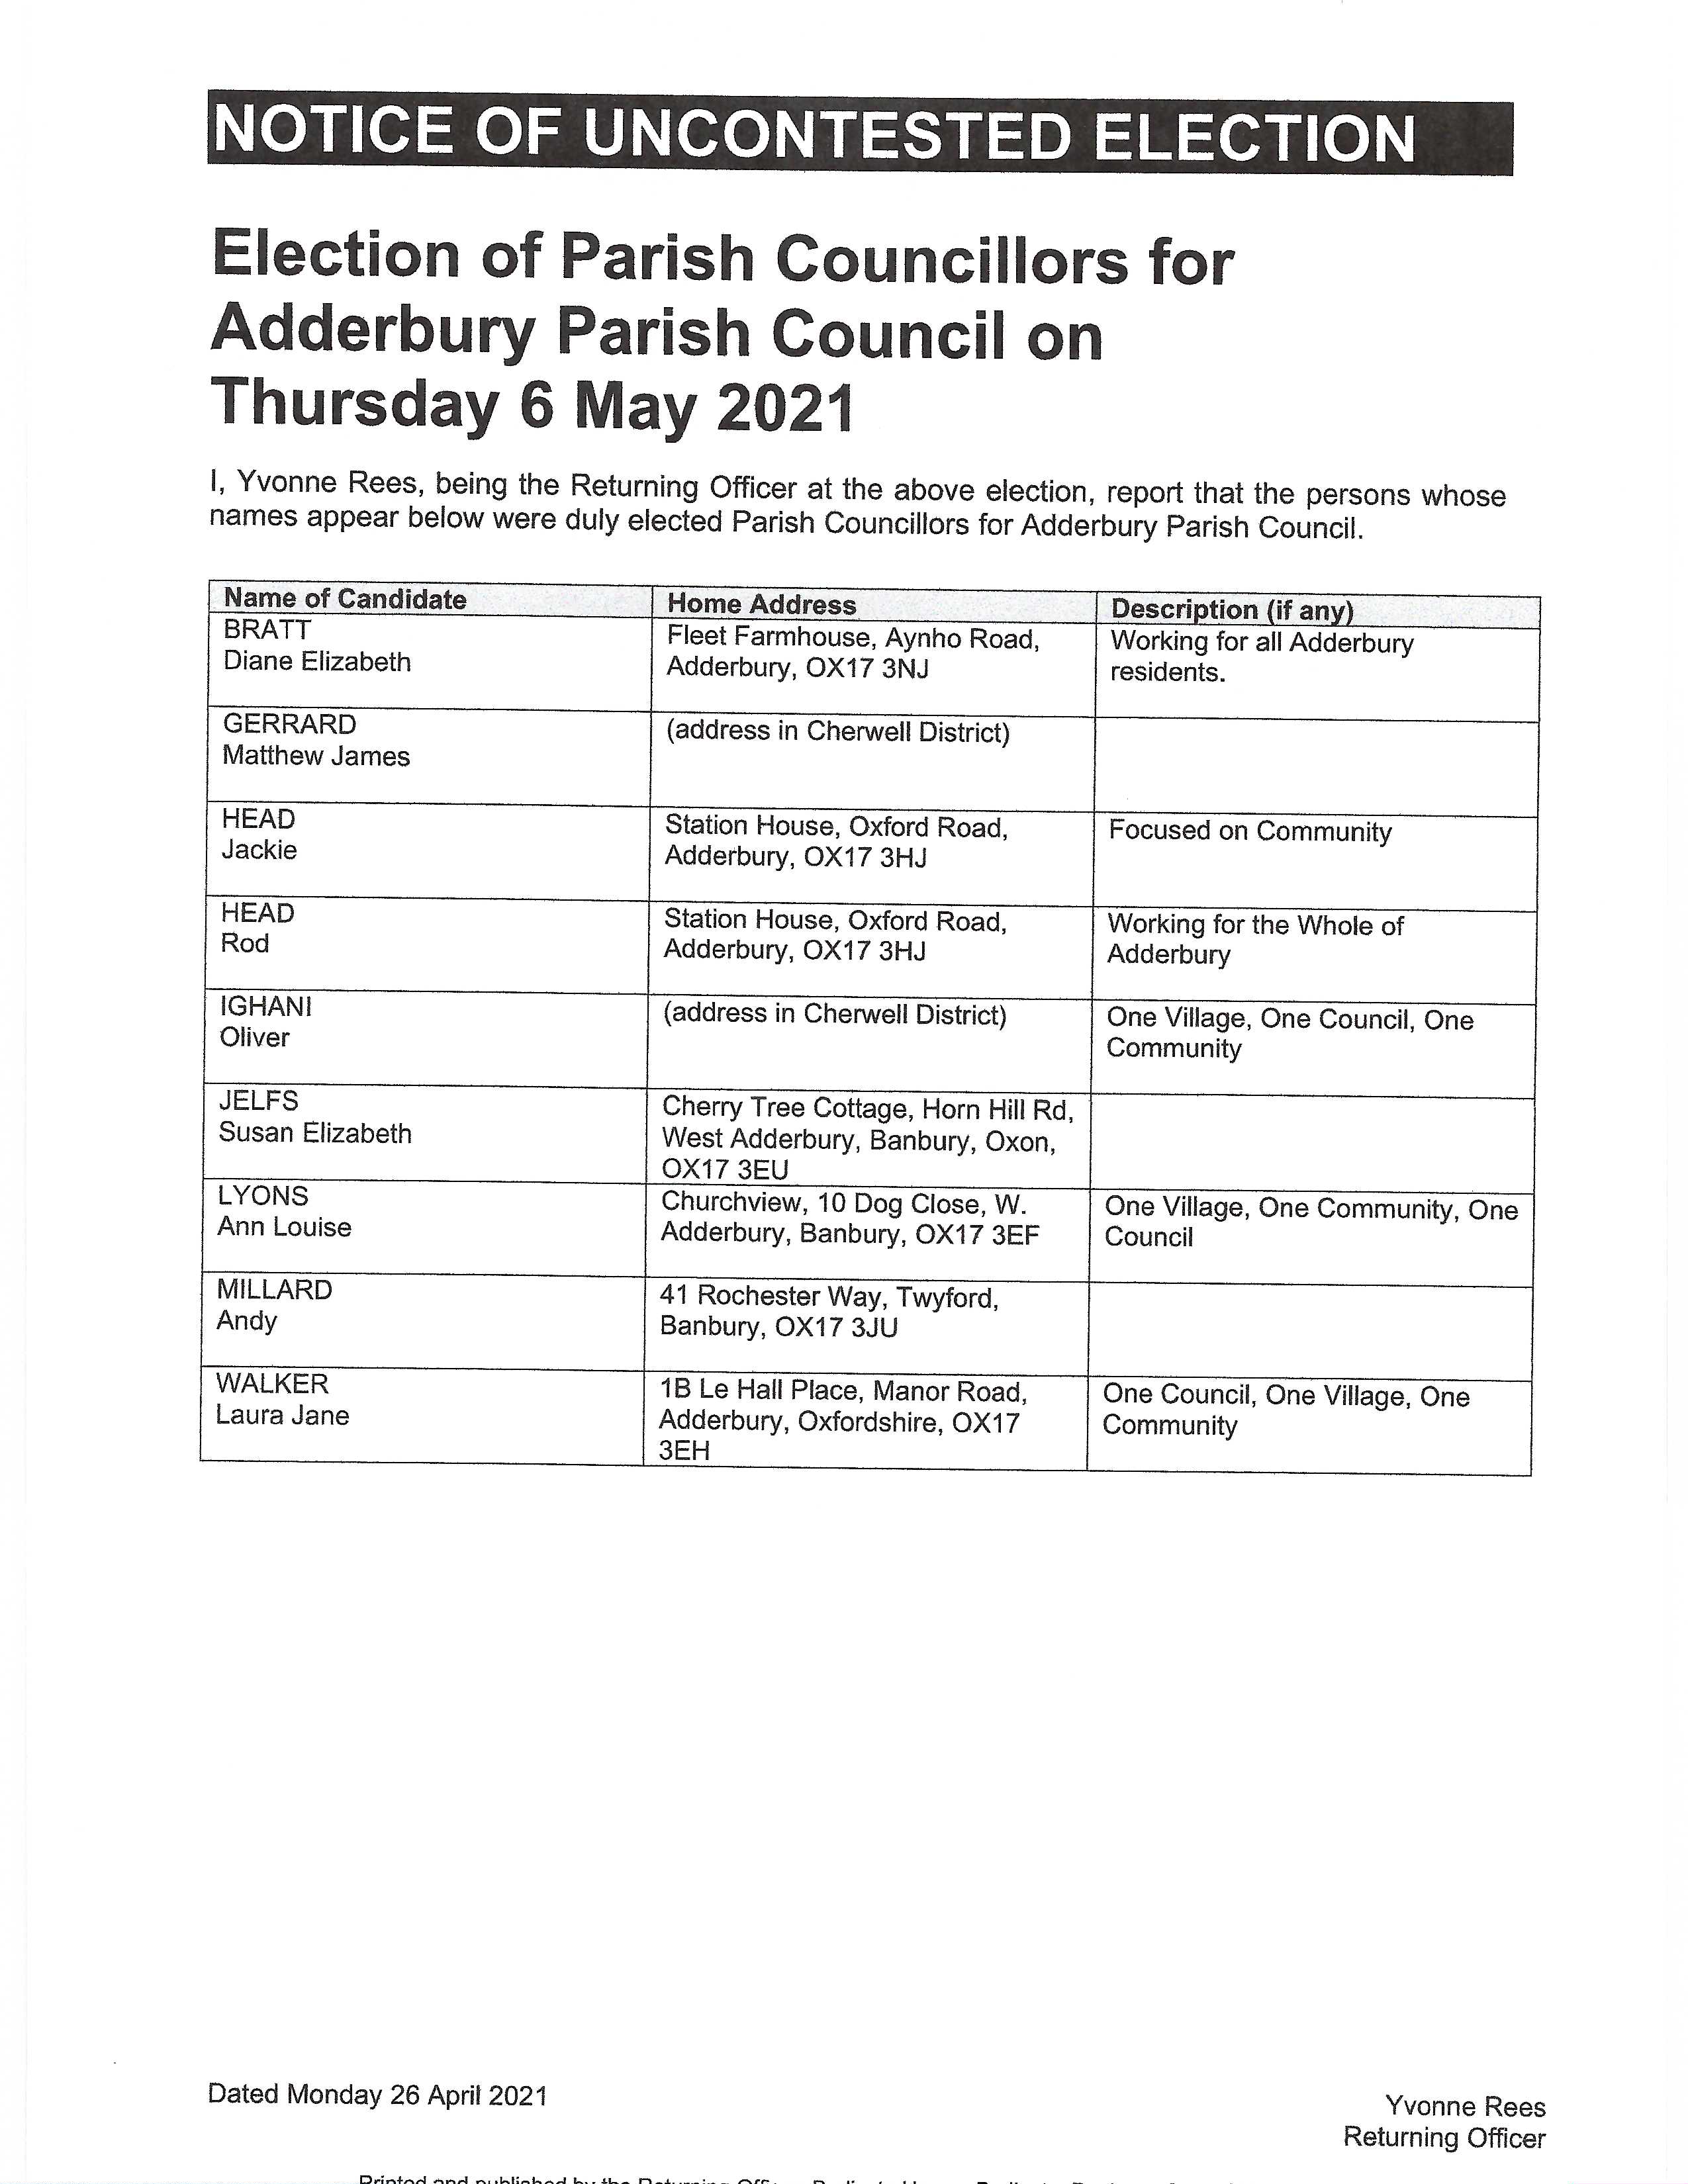 images/news/Notice of Uncontested election Adderbury May 2021.jpg